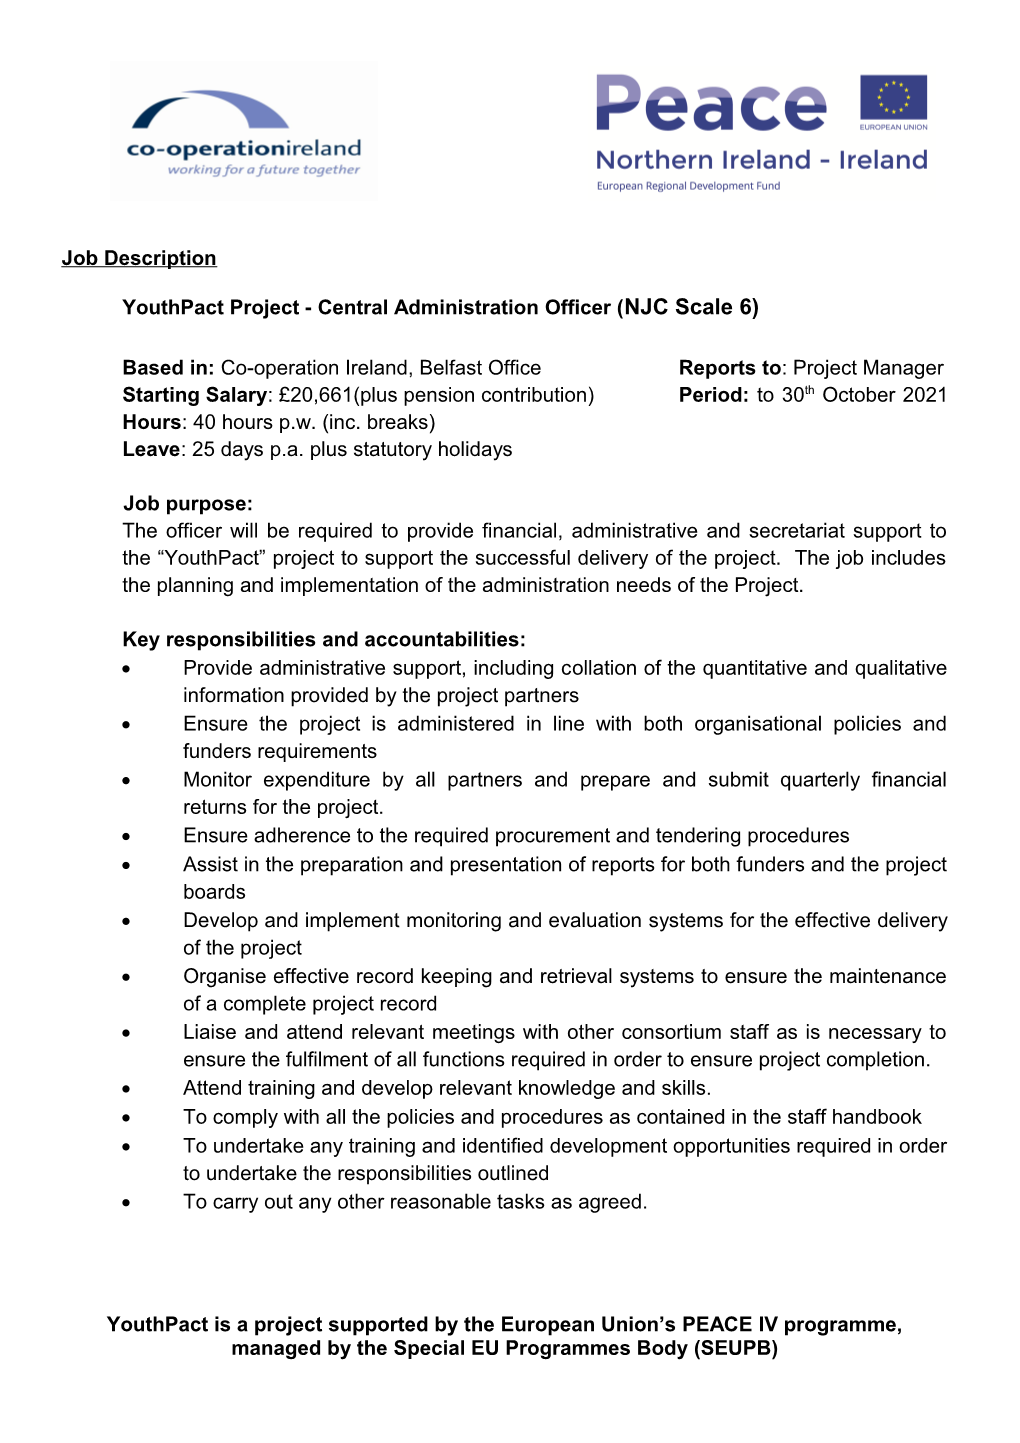 Youthpact Project - Central Administration Officer (NJC Scale 6)